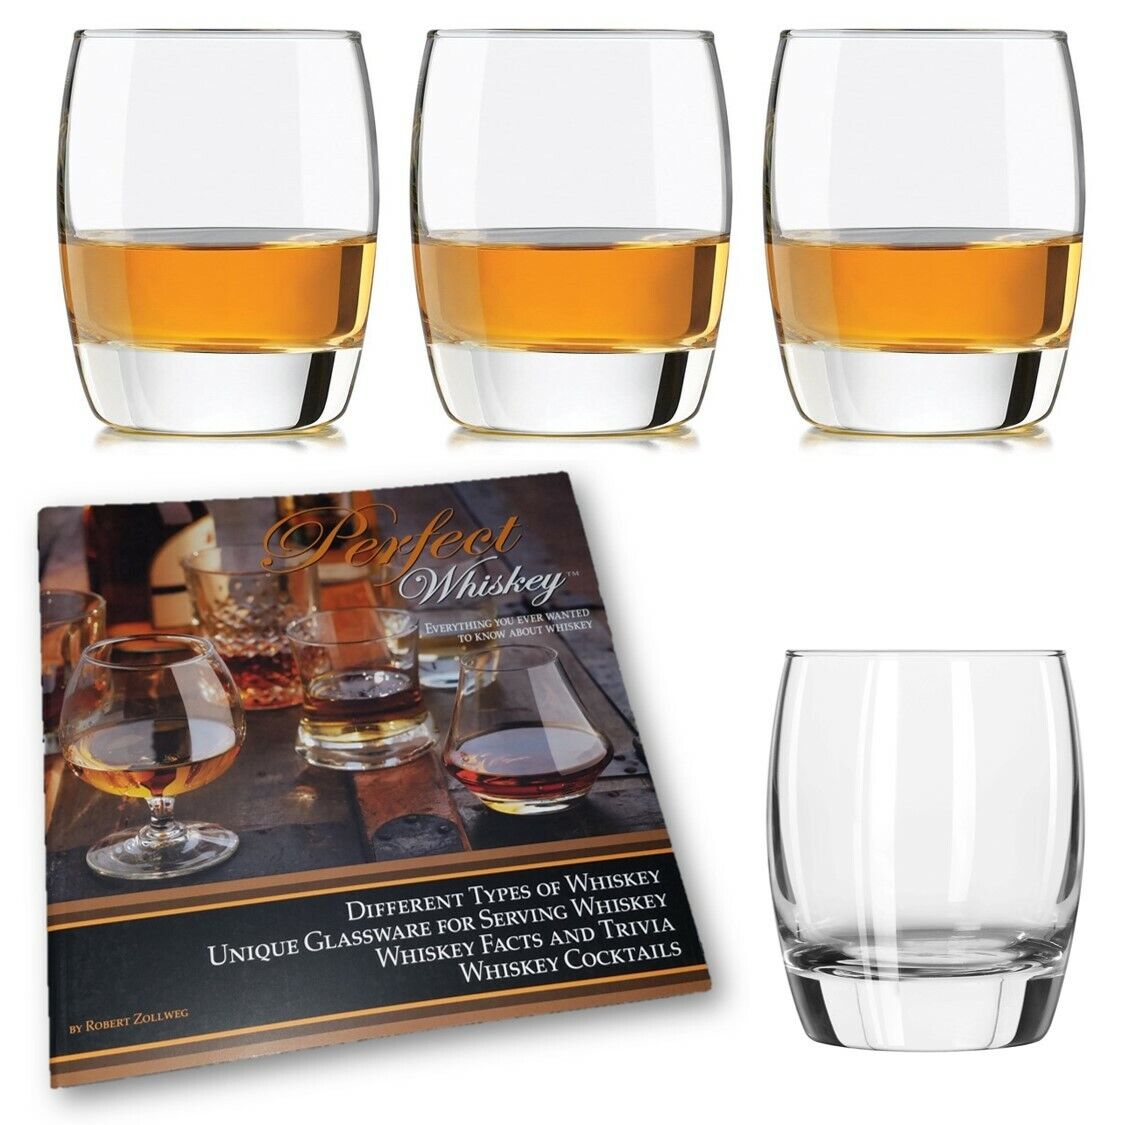 4-PC LIBBEY 9.5 OUNCE TASTING GLASSES & PERFECT WHISKEY SOFTCOVER RECIPE BOOK